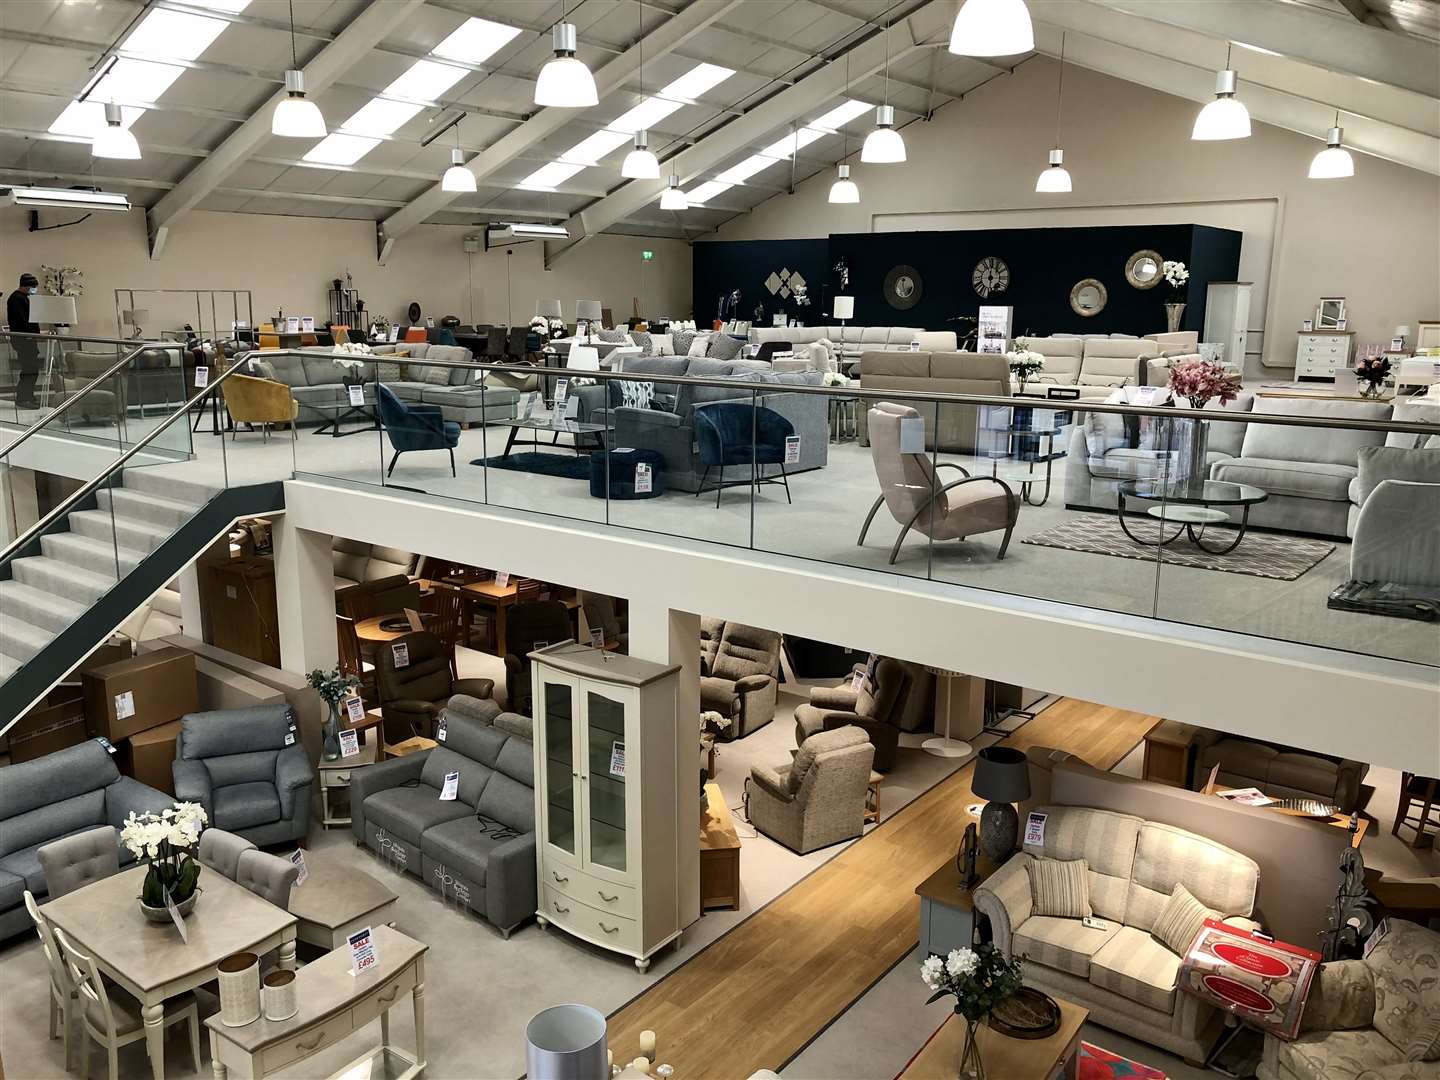 Lukehurst furniture store in Sittingbourne reopened its doors in April 2021 with a new mezzanine second floor extension to offer more display space and a wider choice of products.